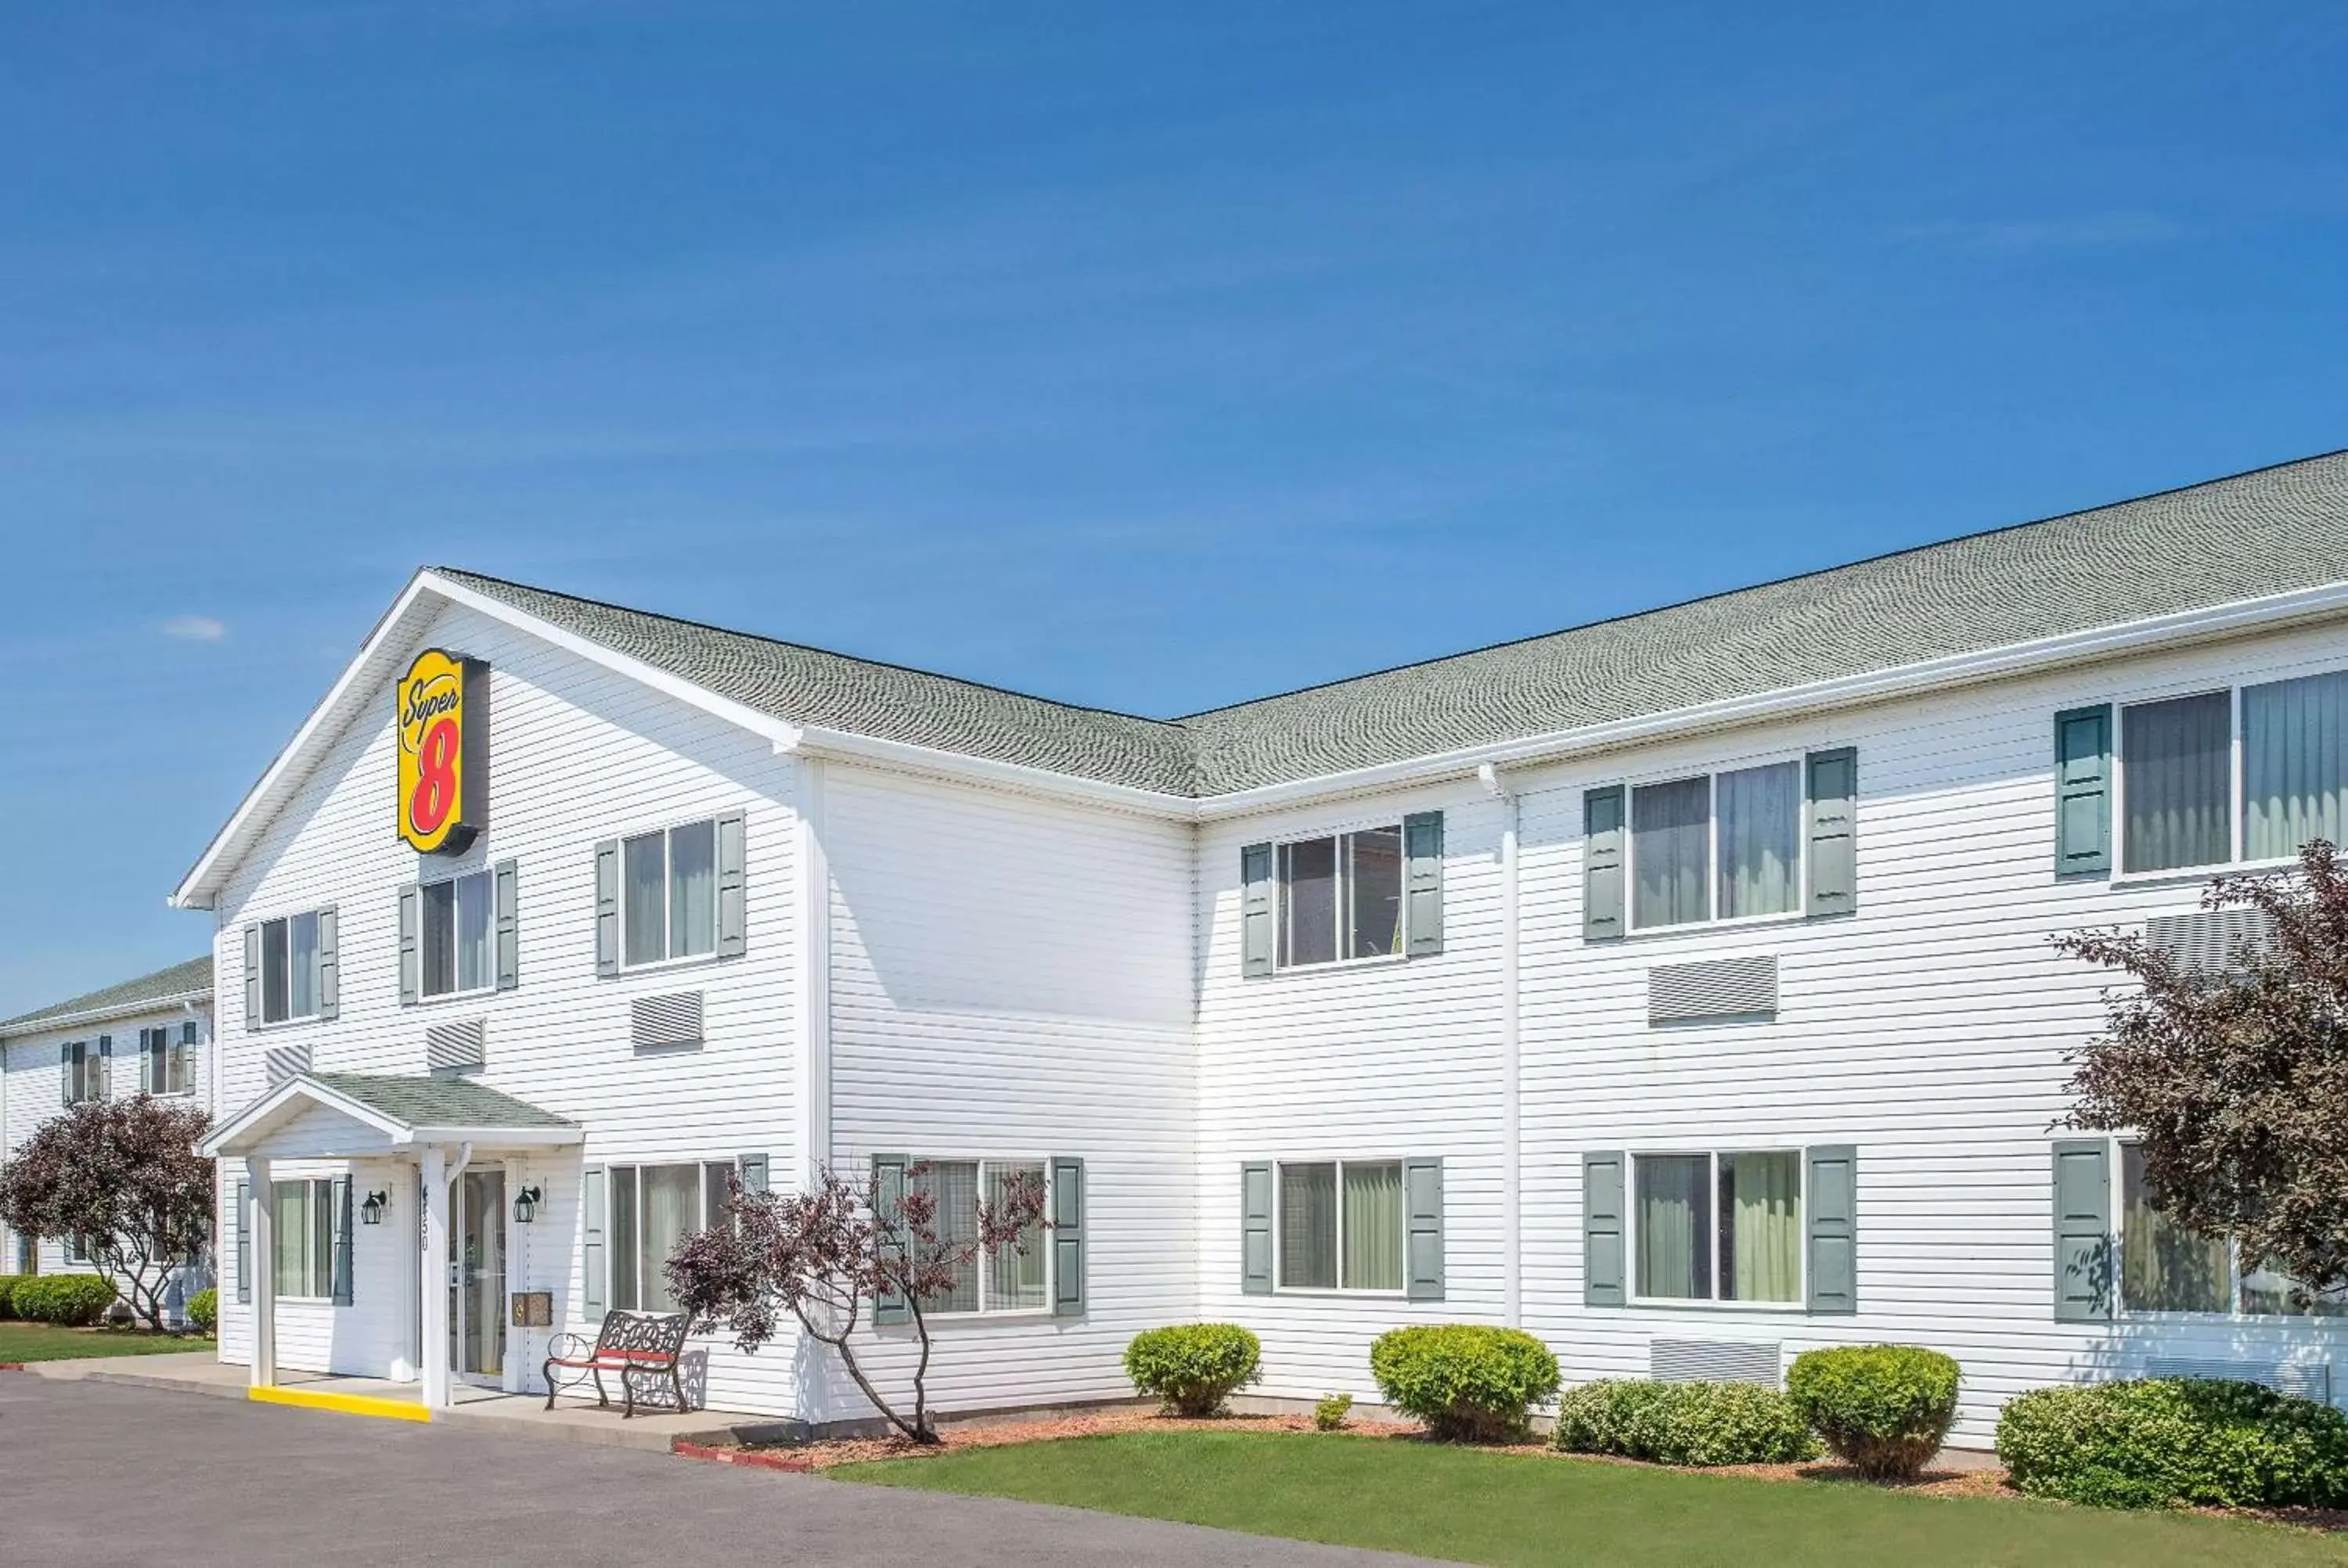 Property Building in Super 8 by Wyndham Canandaigua